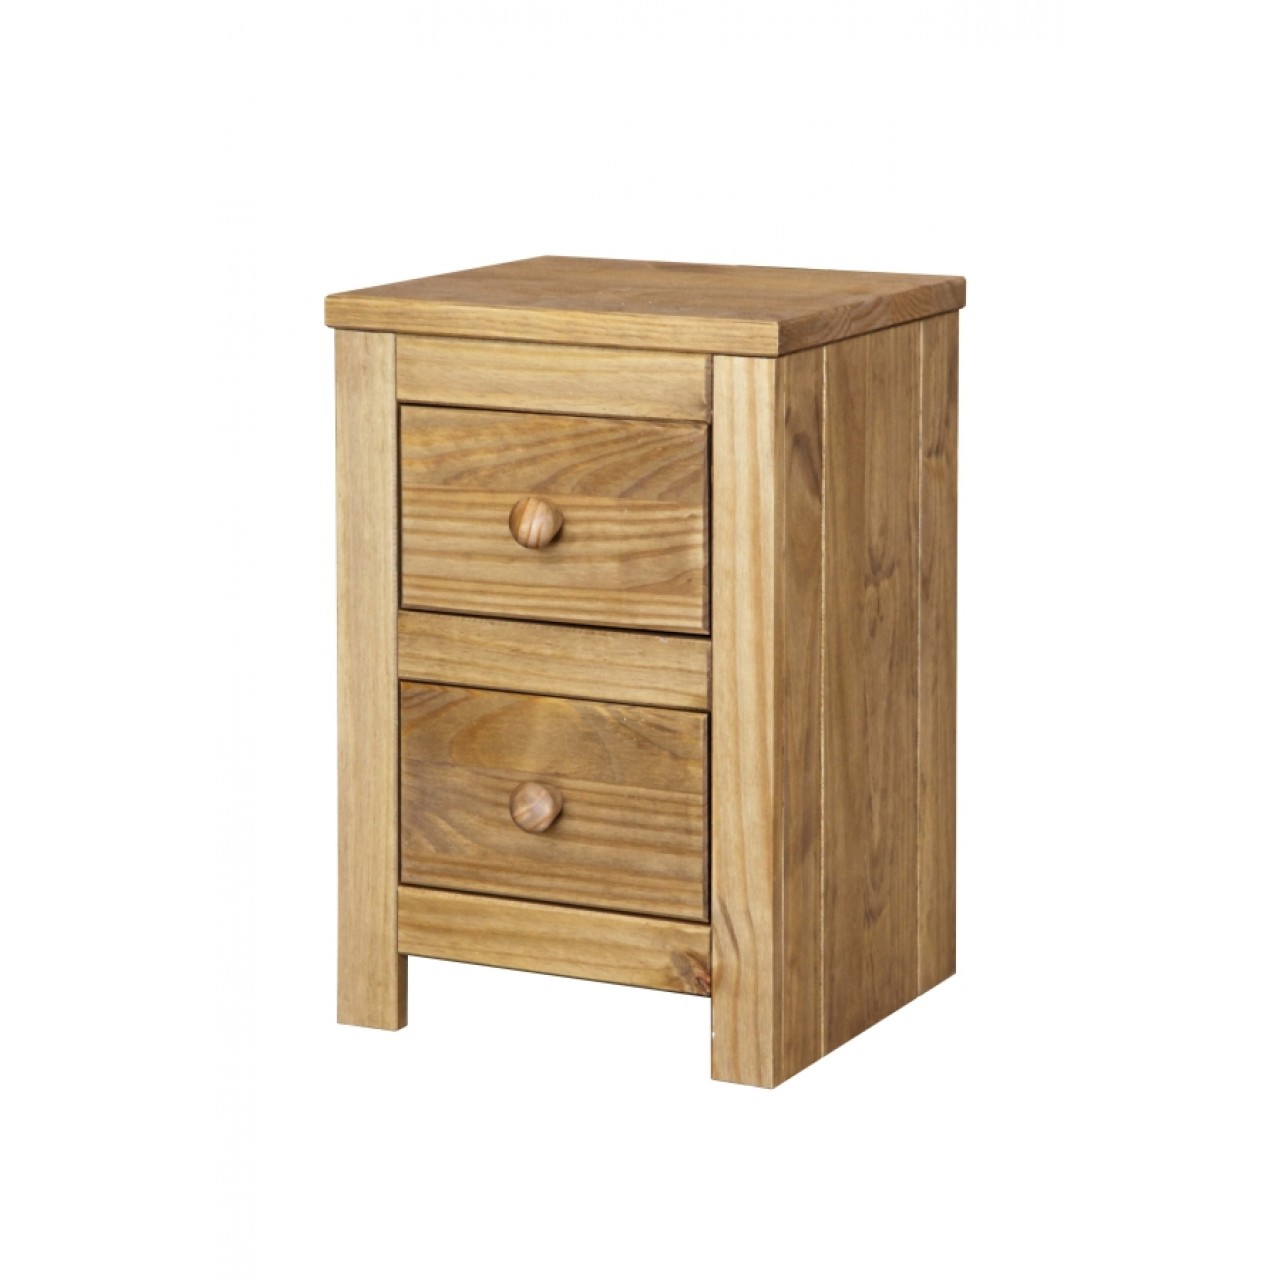 Core Products Hacienda 2 Drawer Petite Bedside Cabinet